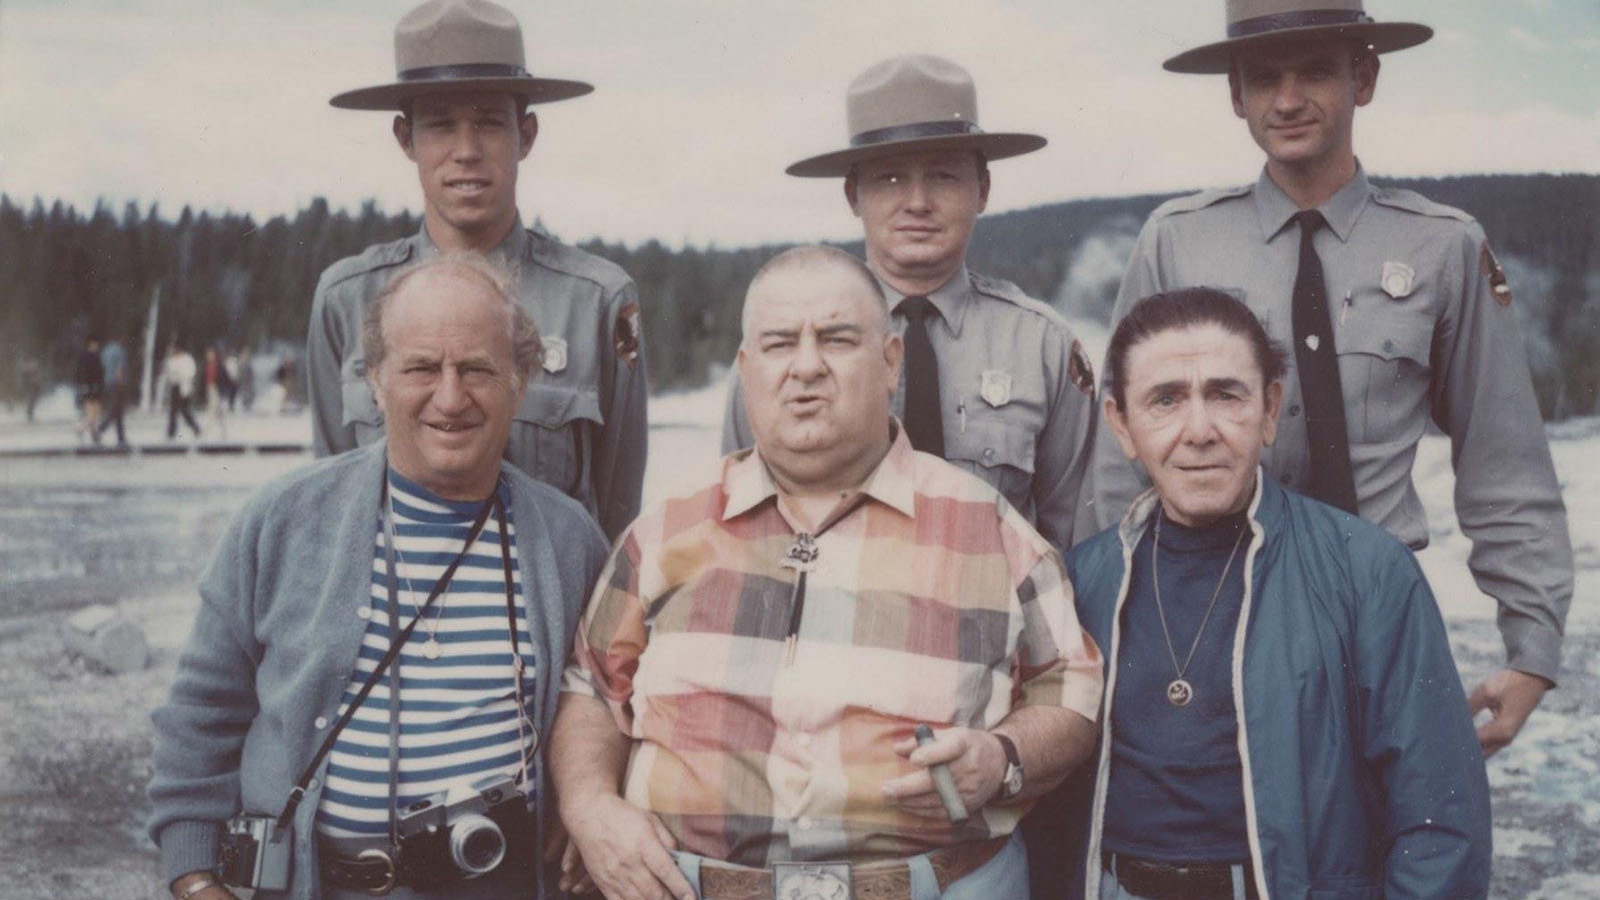 Larry Fine, Joe DeRita and Moe Howard — aka The Three Stooges — pose with Yellowstone rangers R. Schultz, Stewart Orgill and S. Connelly at Old Faithful during their 1969 visit. It was the first time the Three Stooges had filmed on location rather than on a soundstage or ranch in California.